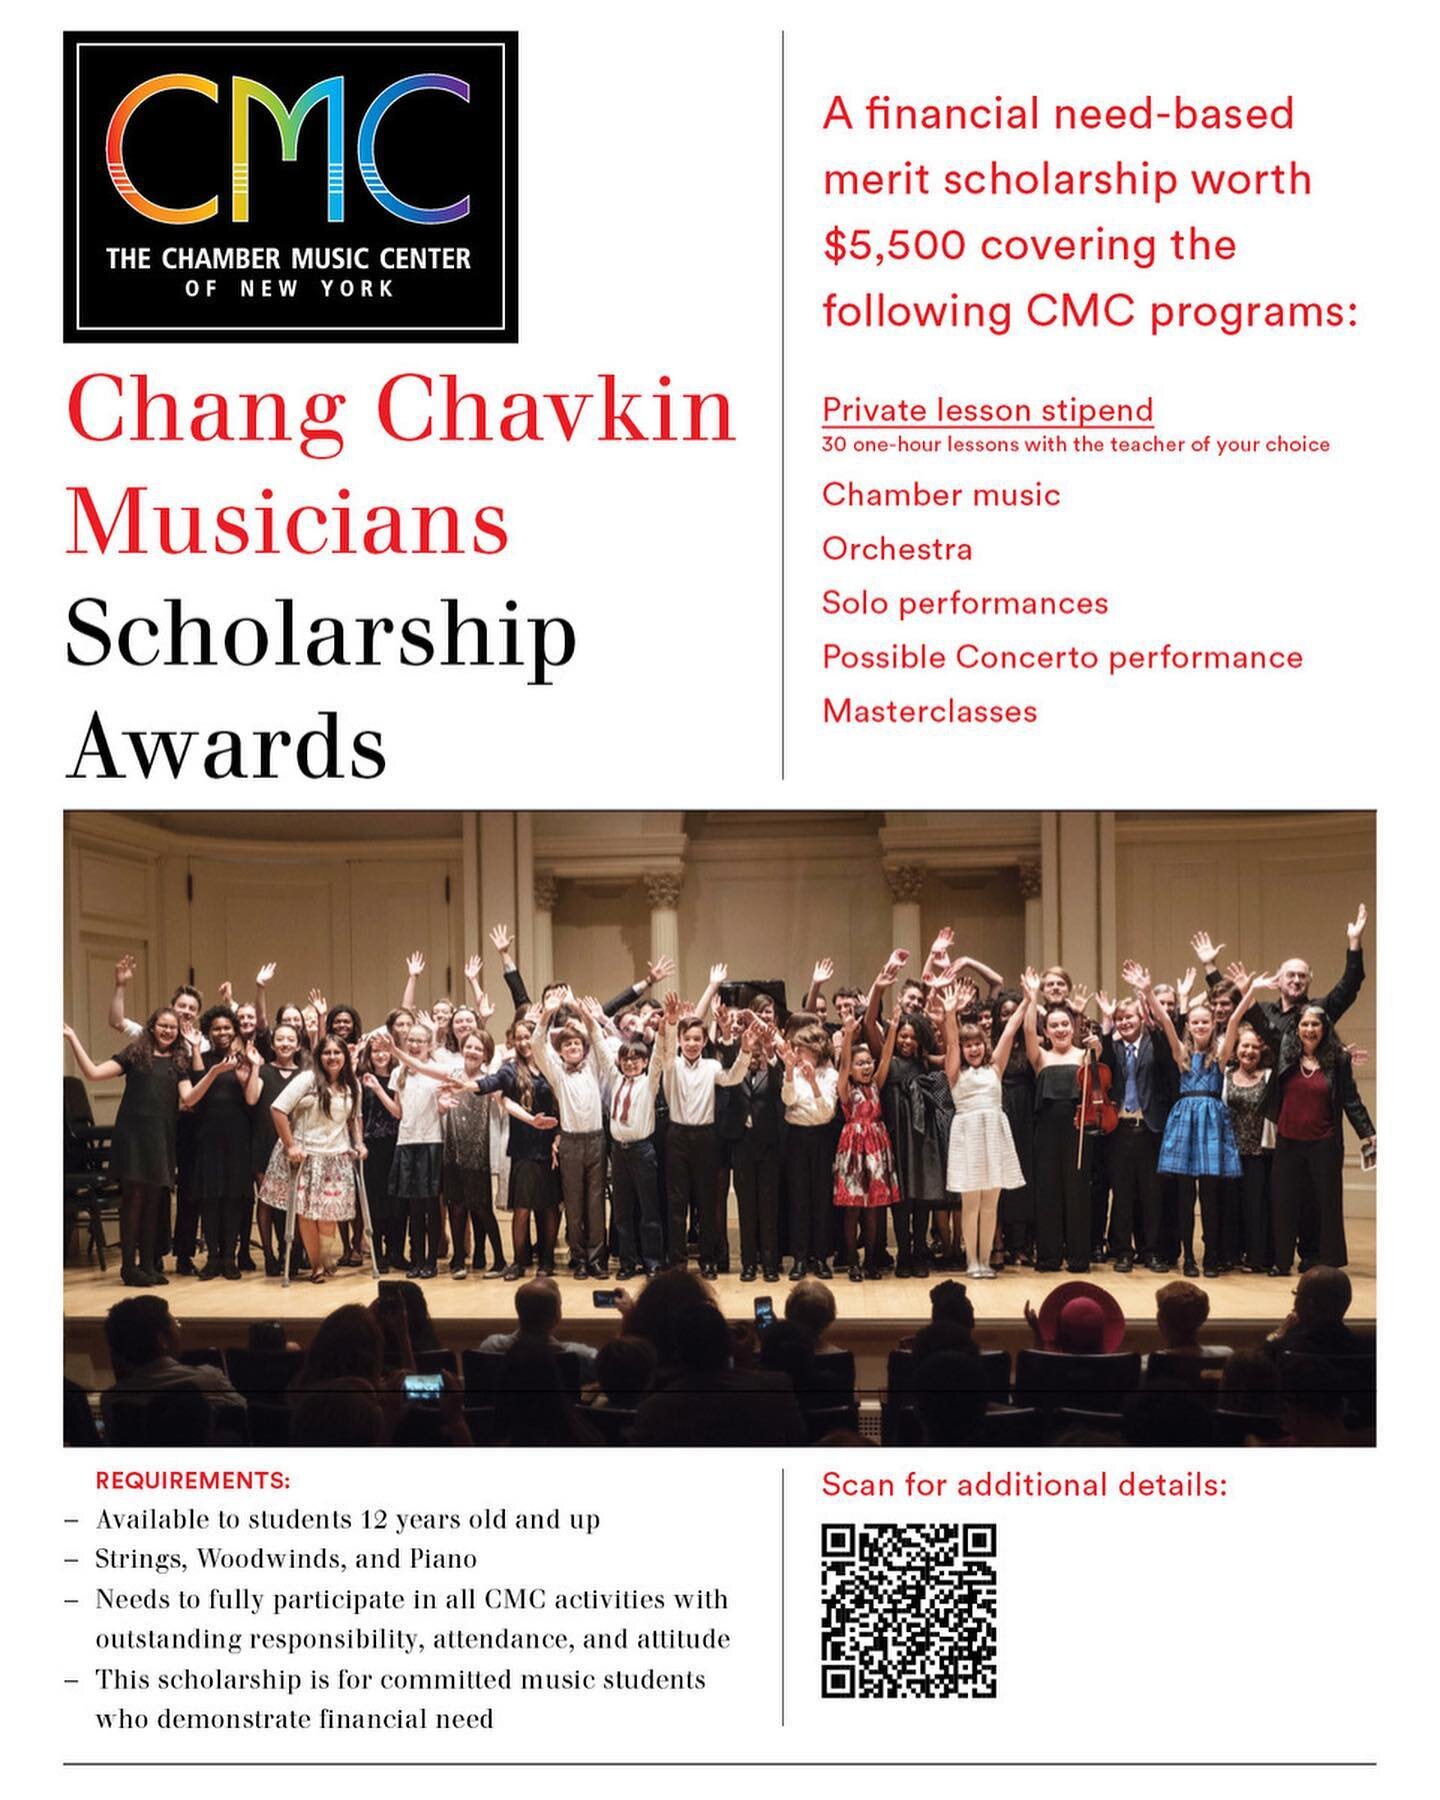 CMC offers a total of five Musician Scholarship Awards worth $5,500 each. These scholarships cover CMC full year chamber music, orchestra, SOLOS, and theory, plus a stipend for 30 private lessons from the teacher of your choice! 

Two of the scholars